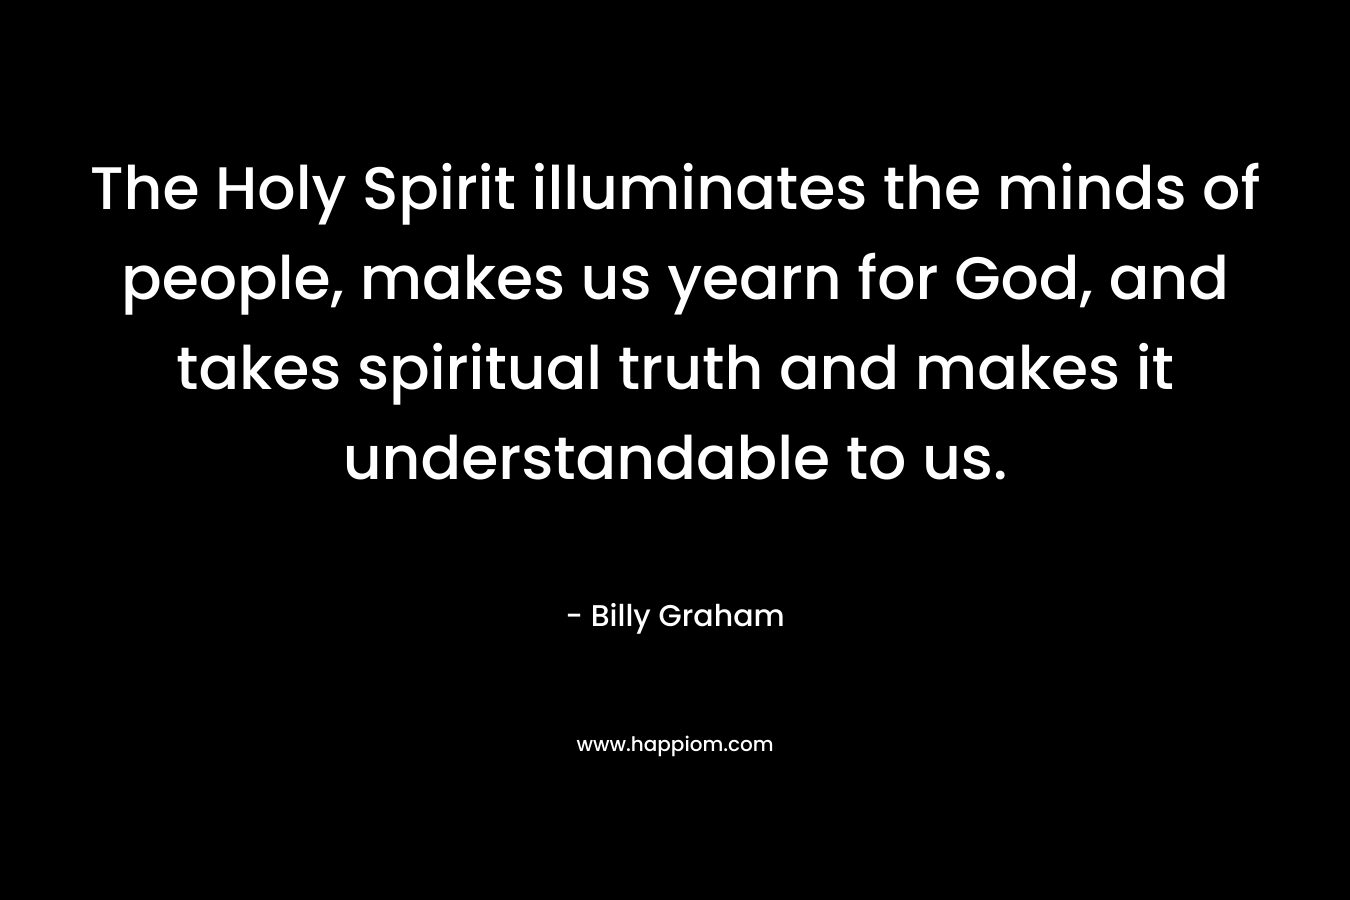 The Holy Spirit illuminates the minds of people, makes us yearn for God, and takes spiritual truth and makes it understandable to us. – Billy Graham